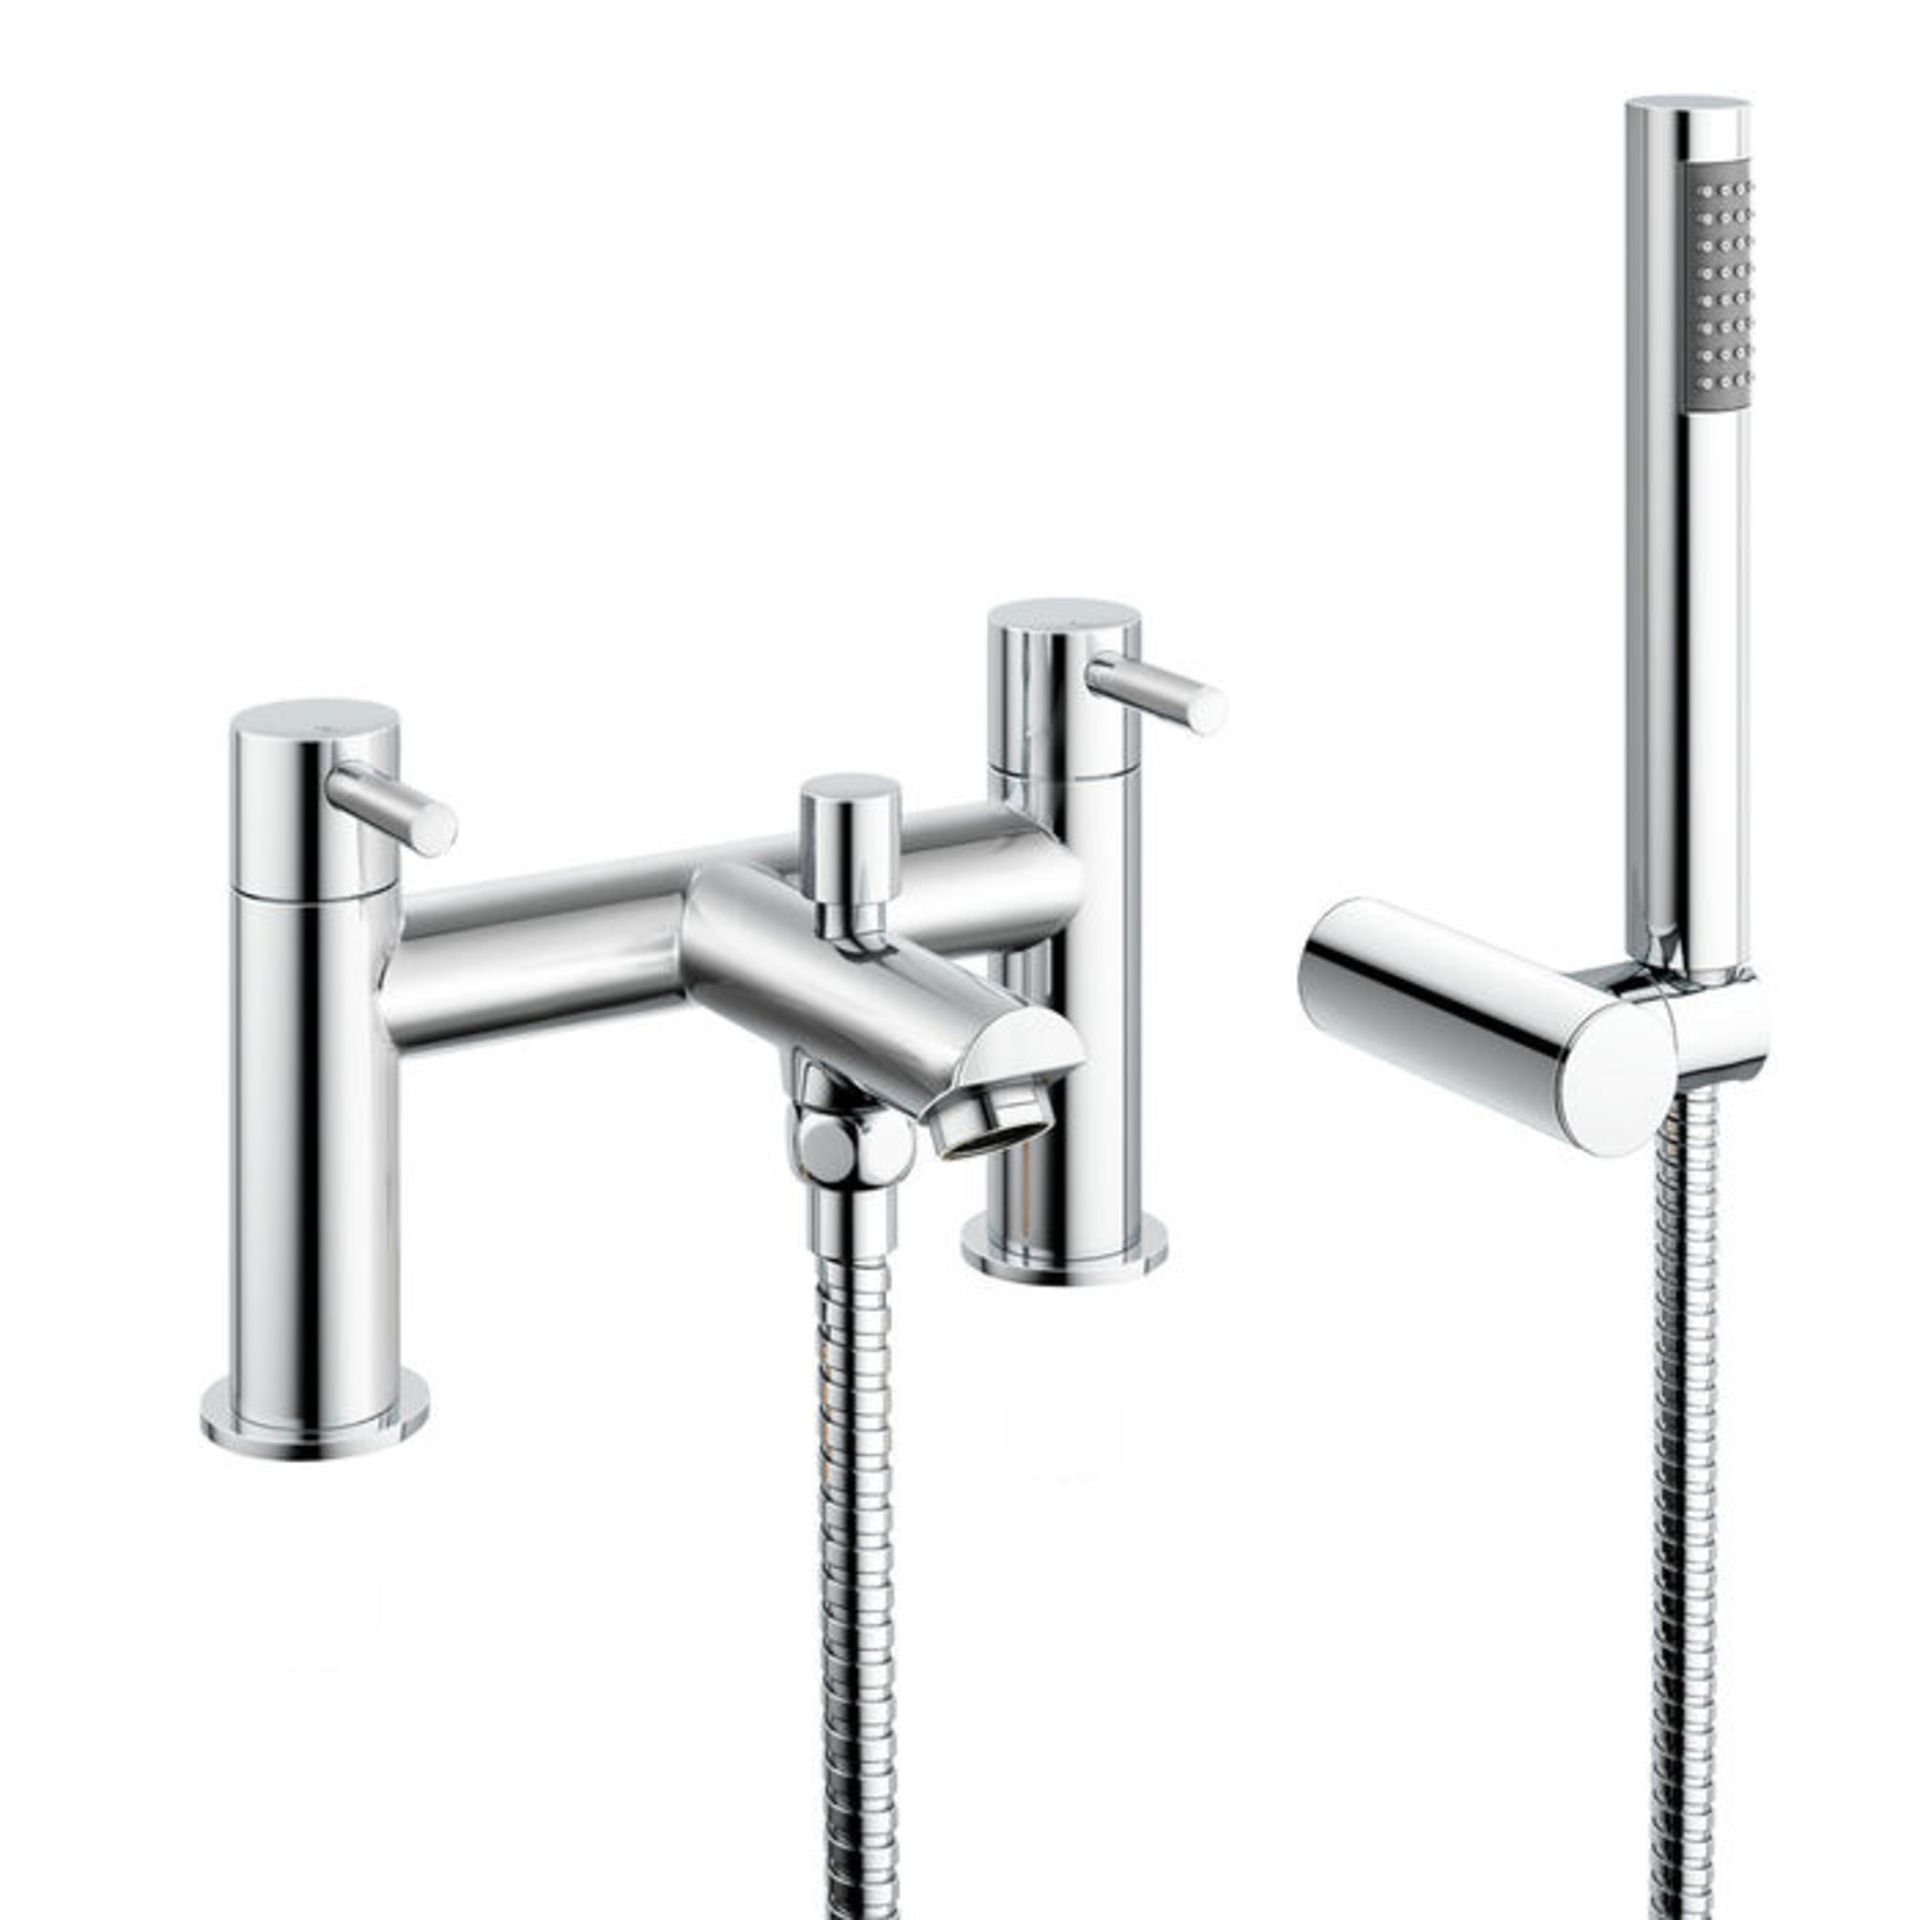 (M18) Gladstone II Bath Mixer Shower Tap with Hand Held. Chrome plated solid brass 1/4 turn solid - Image 3 of 3